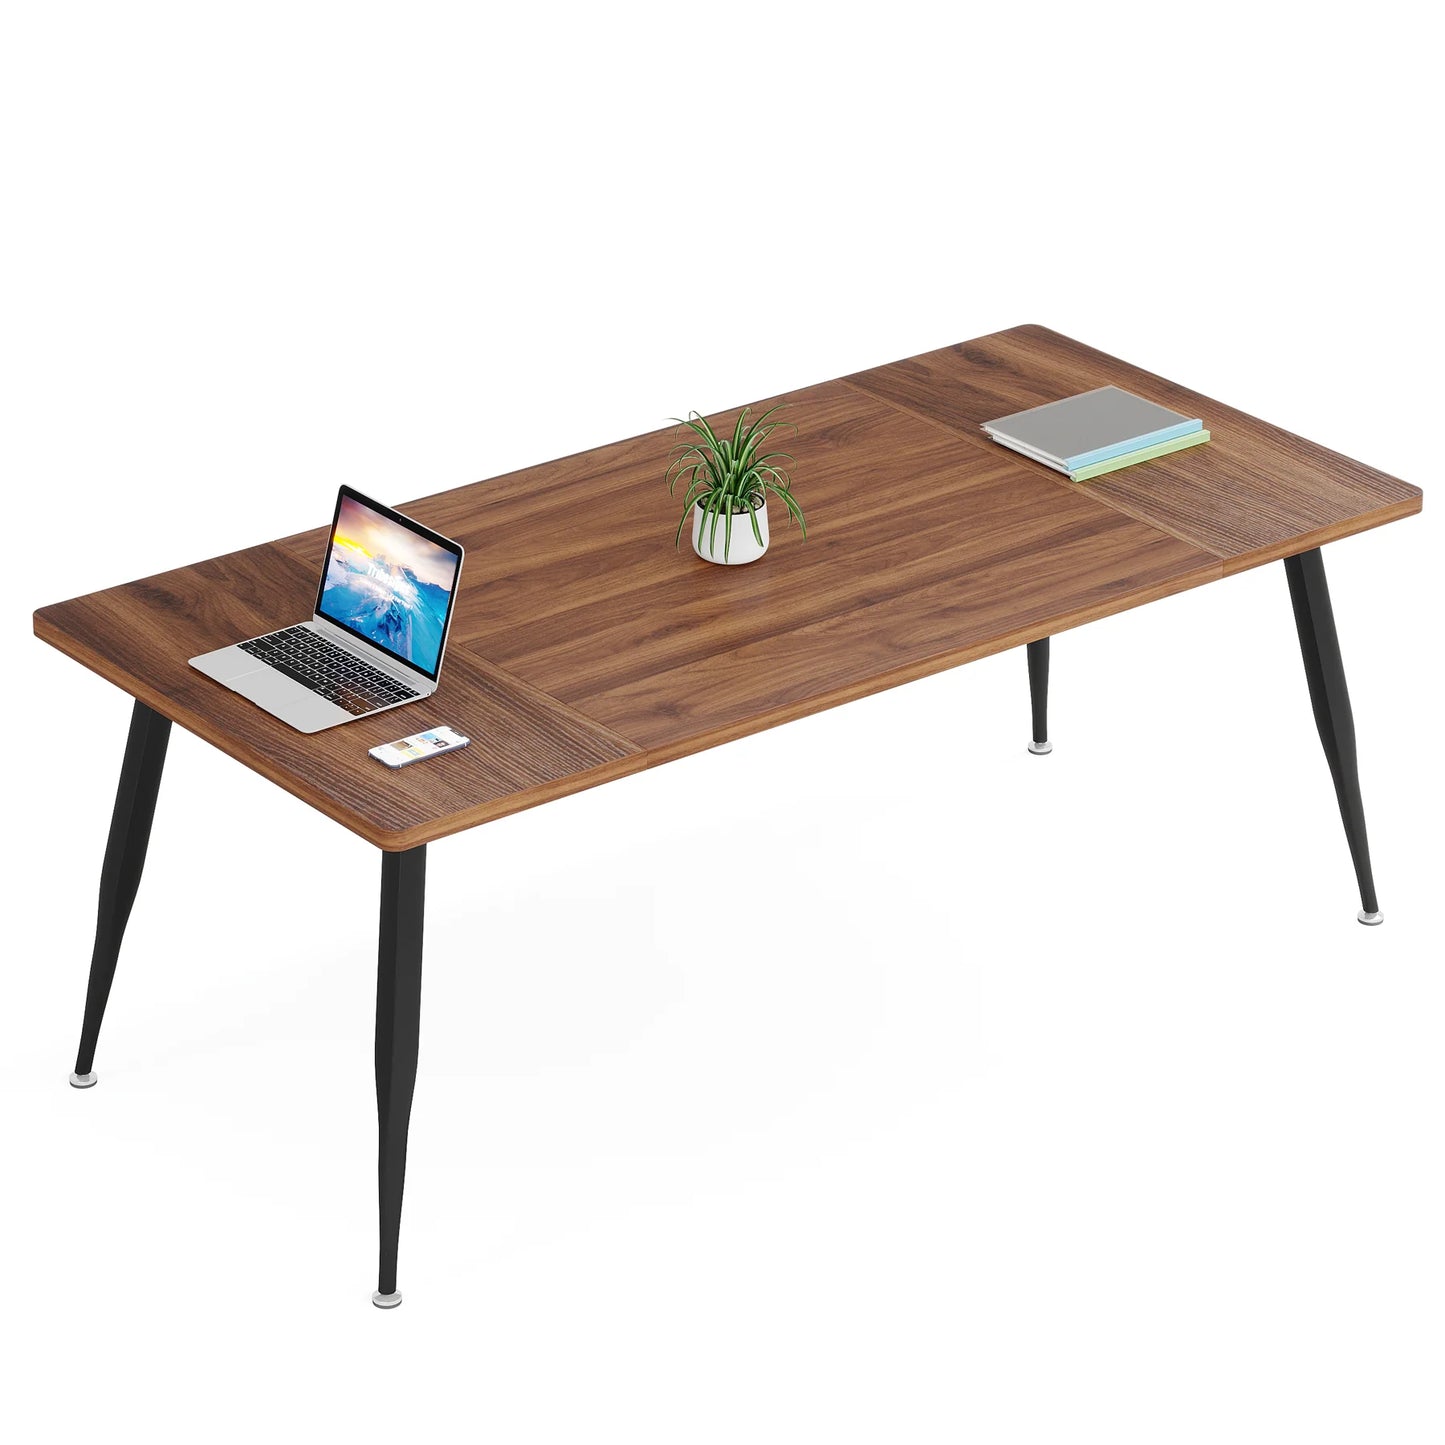 6FT Conference Table, Rectangular Meeting Room Seminar Table